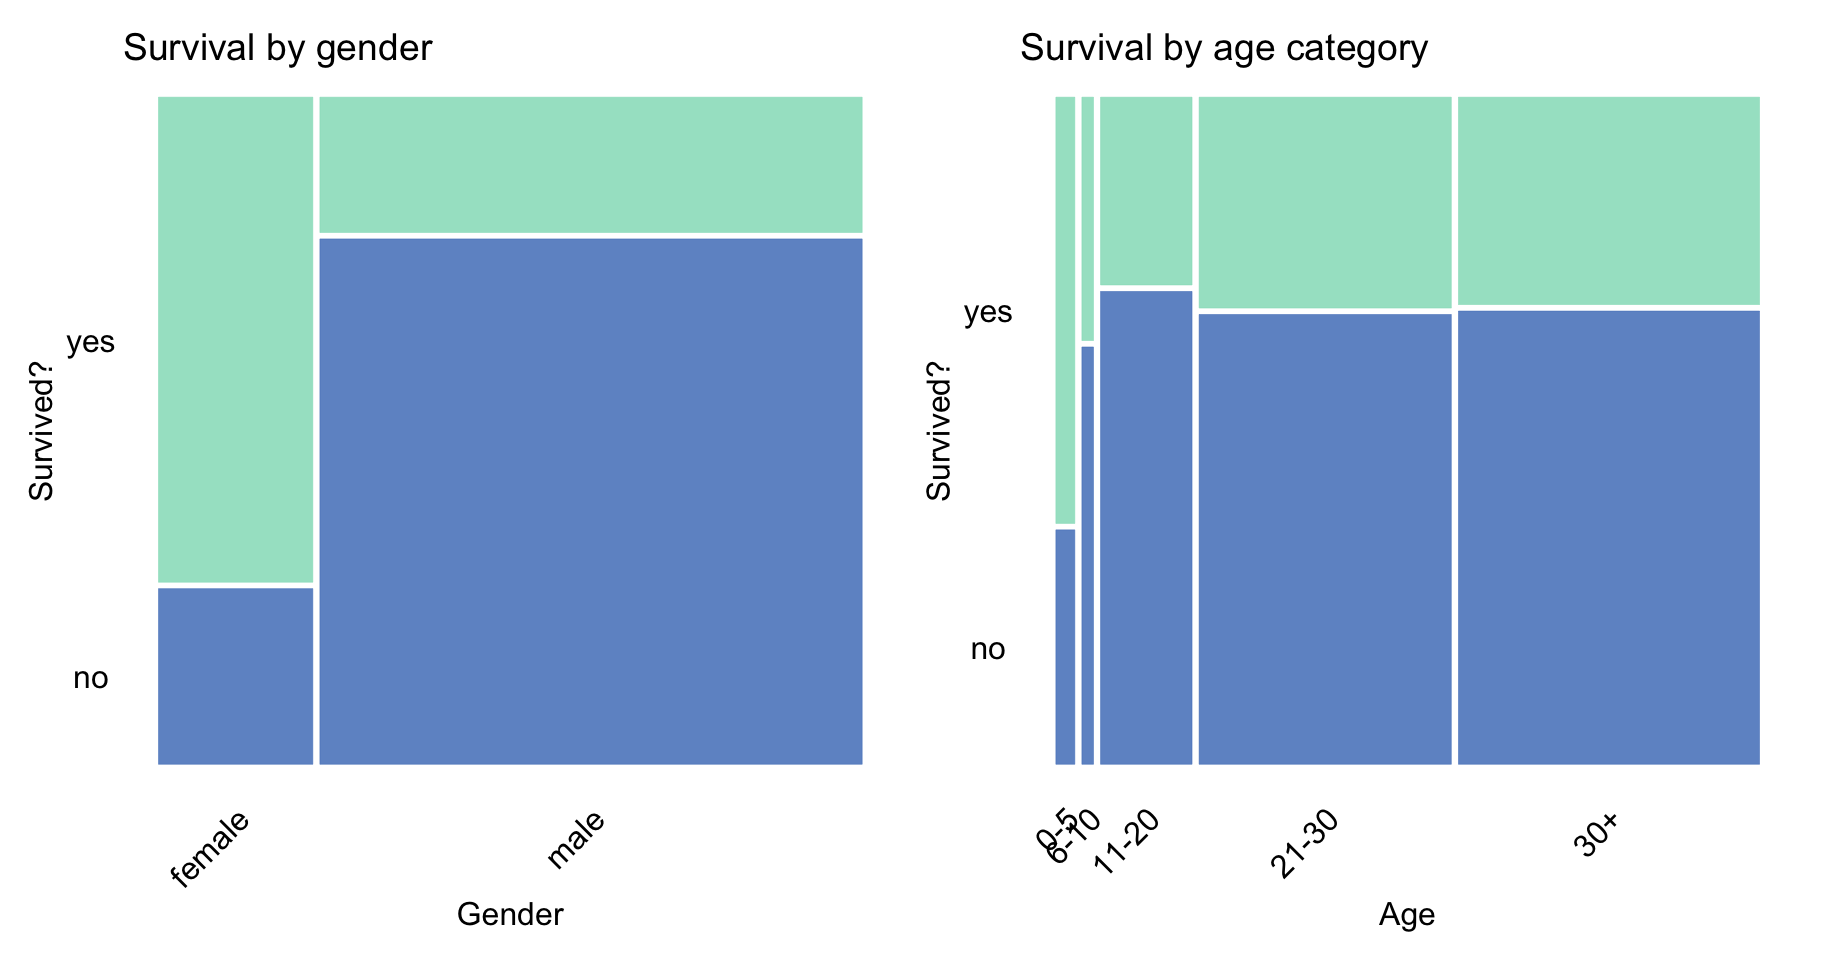 Survival according to gender and age category in the Titanic data.